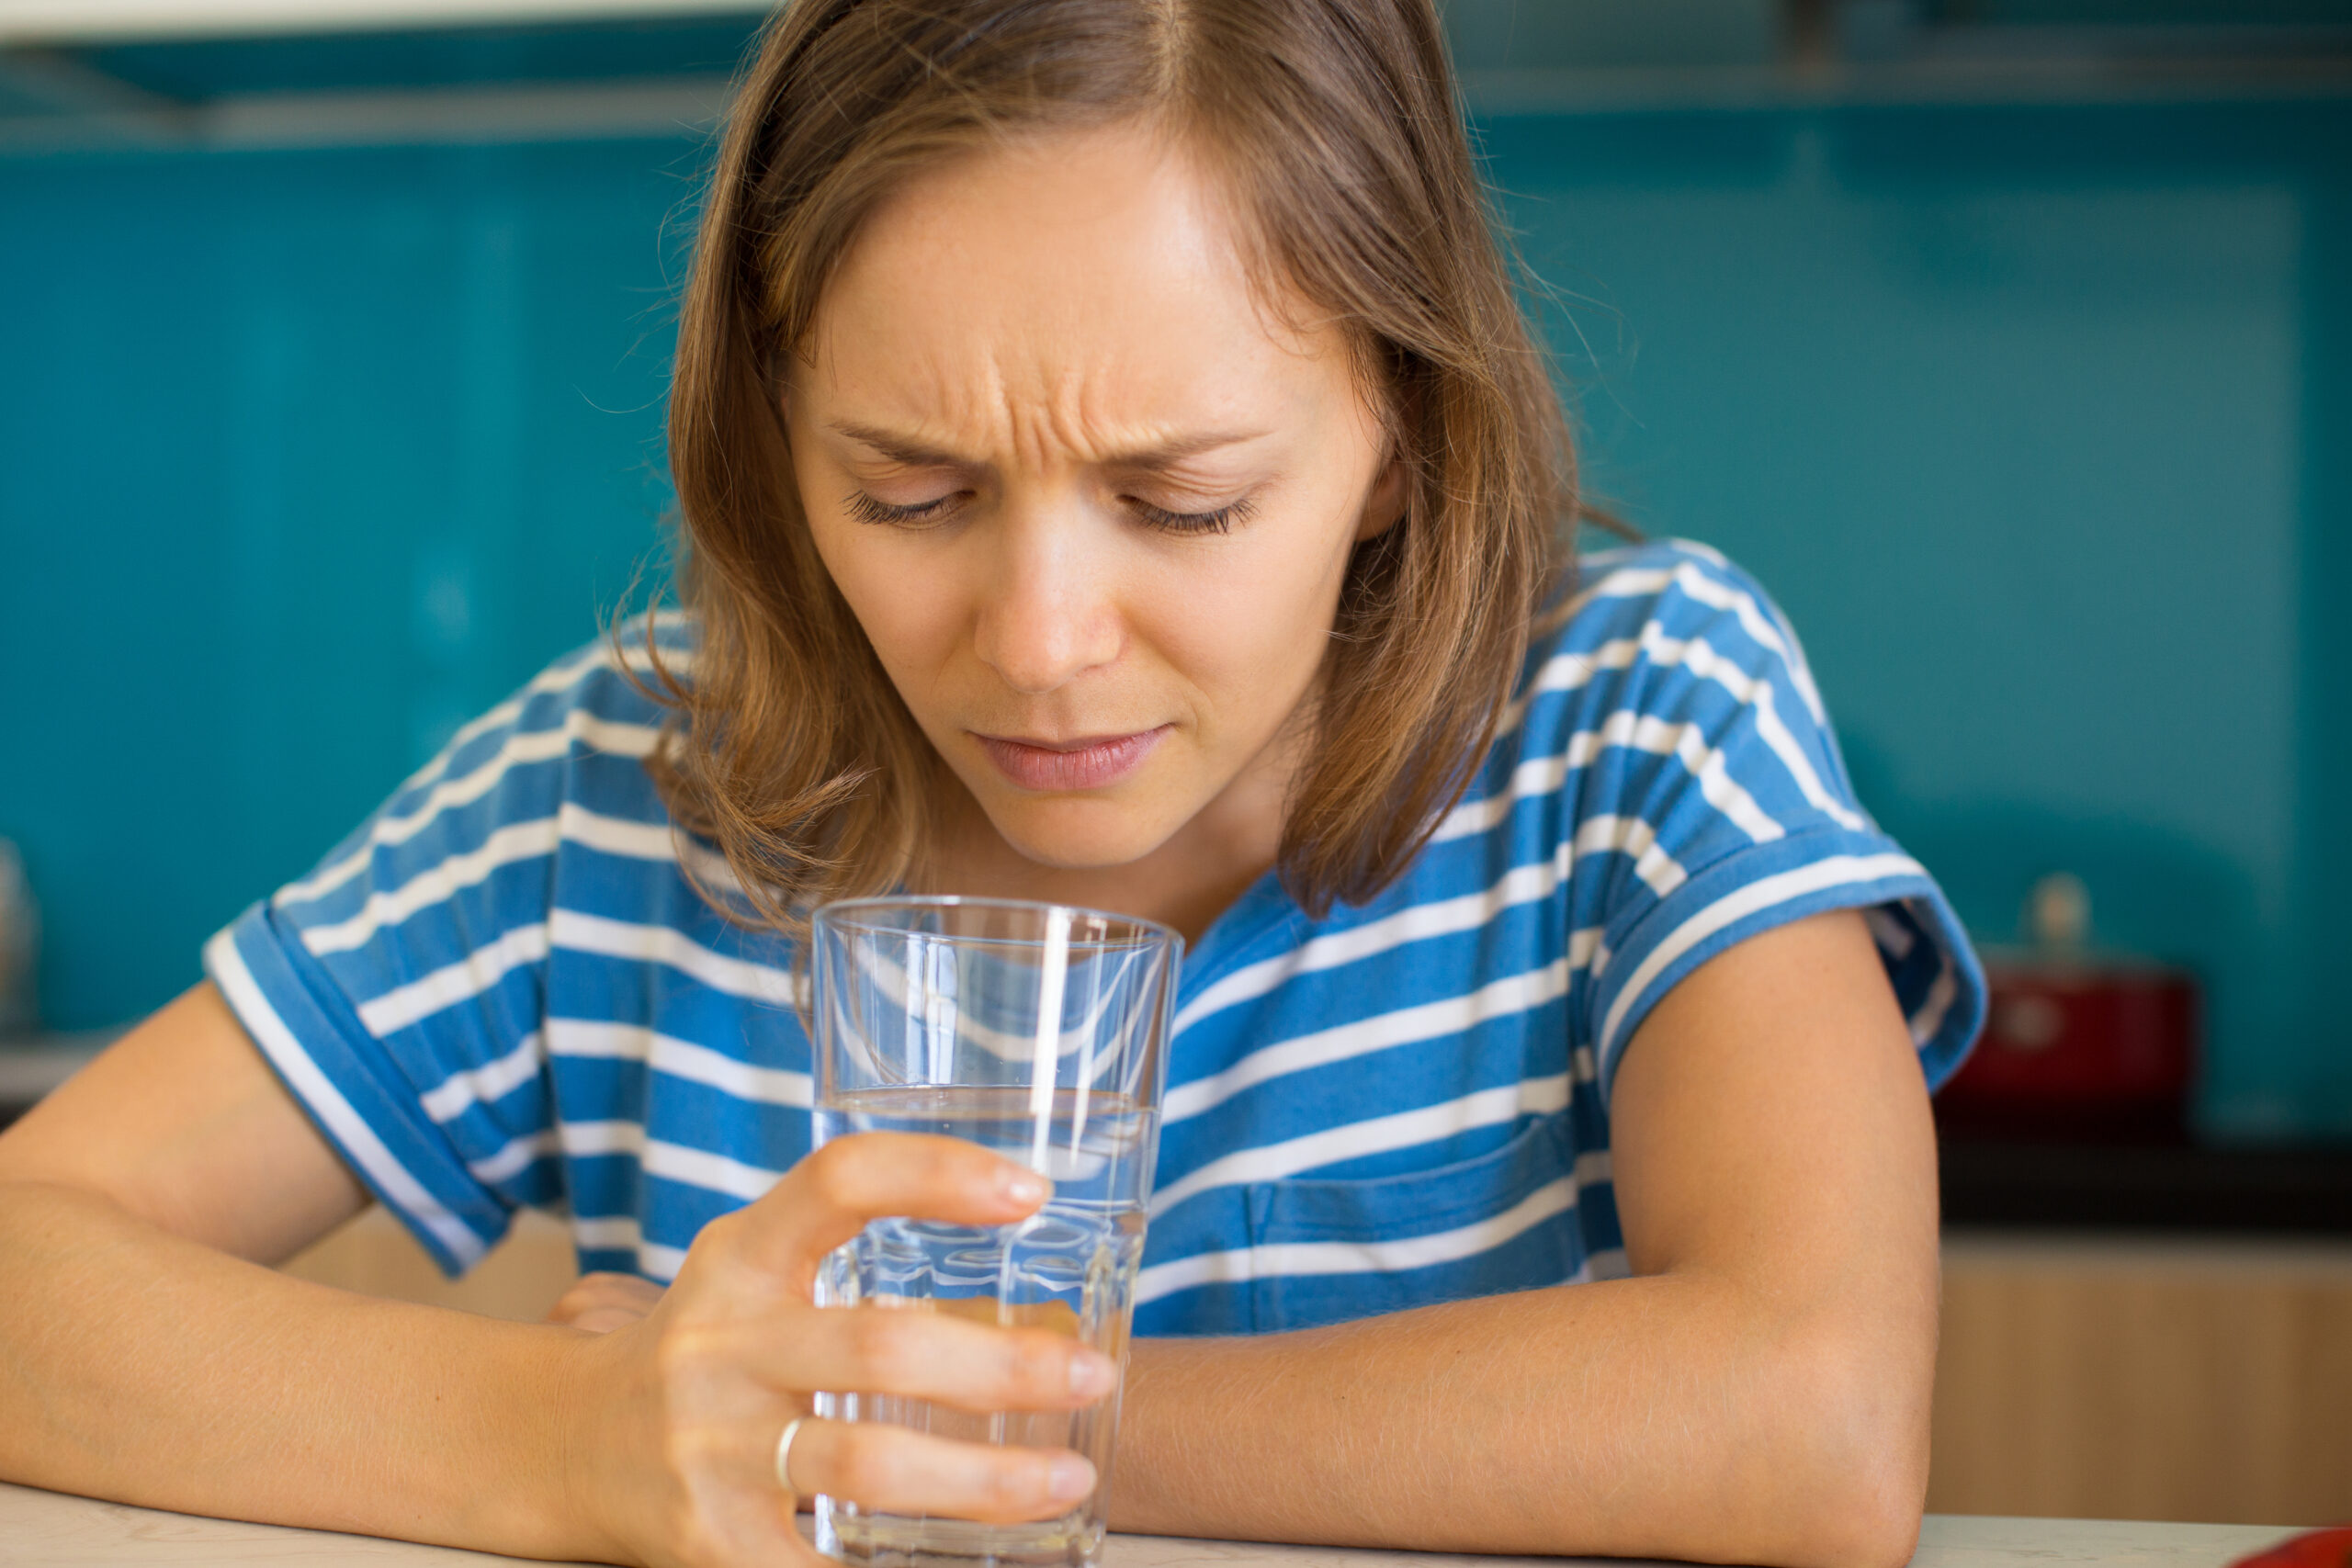 Dissatisfied Woman Looking into Glass of Water